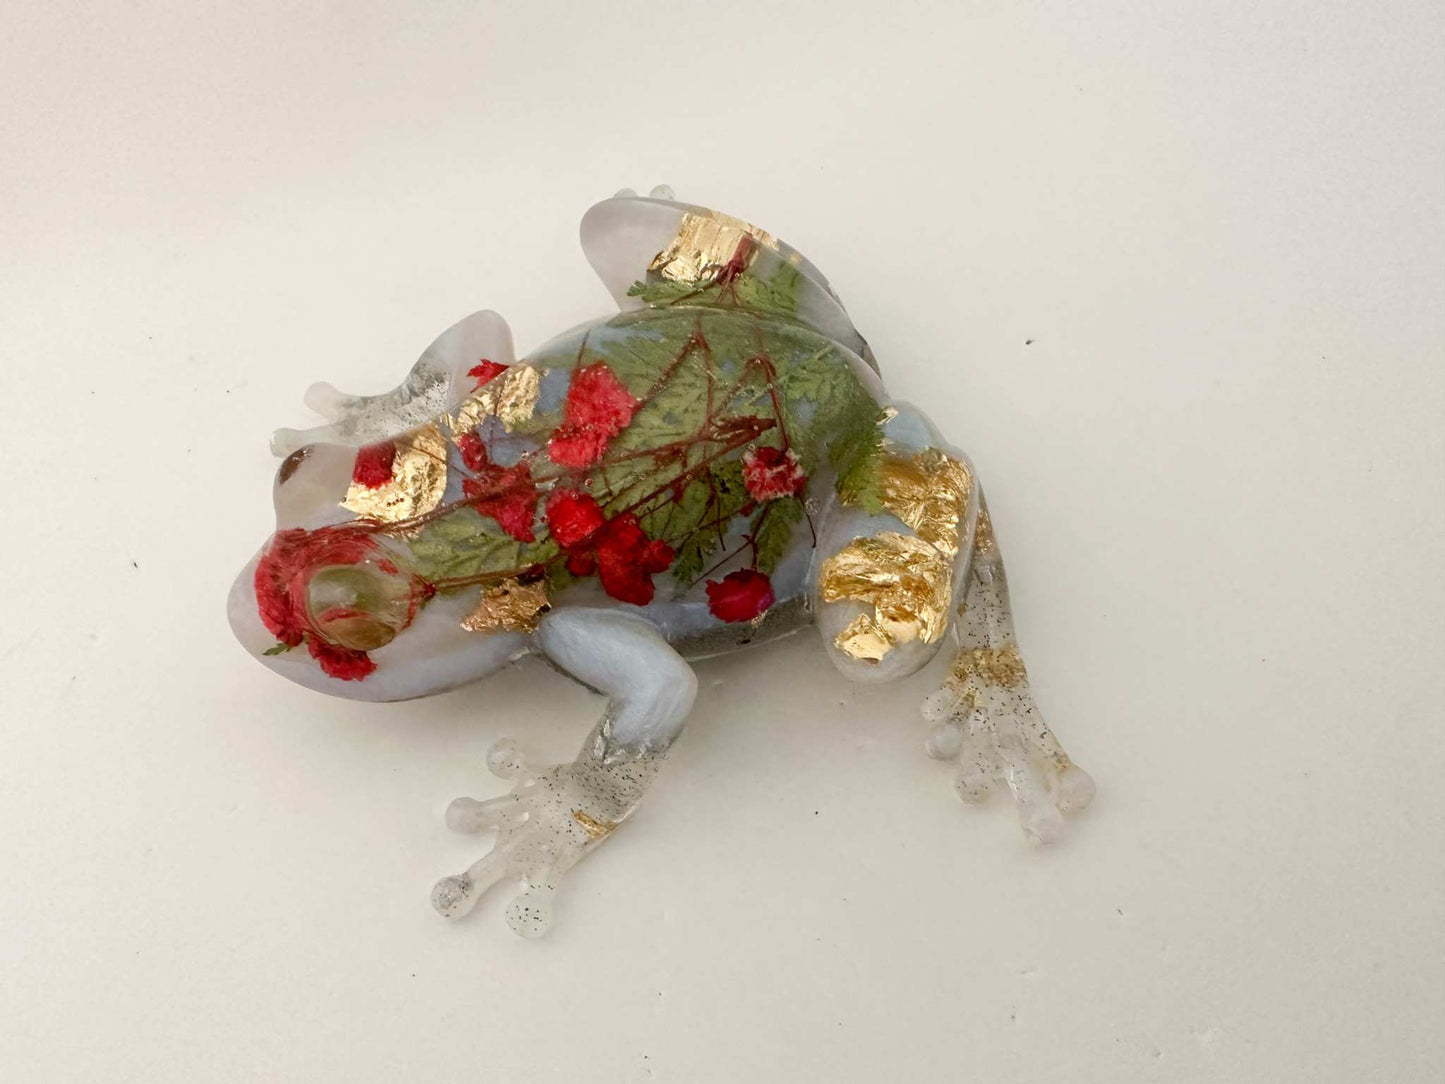 Frog Figurines - Hop into Your Home Whimsical Frog Decor